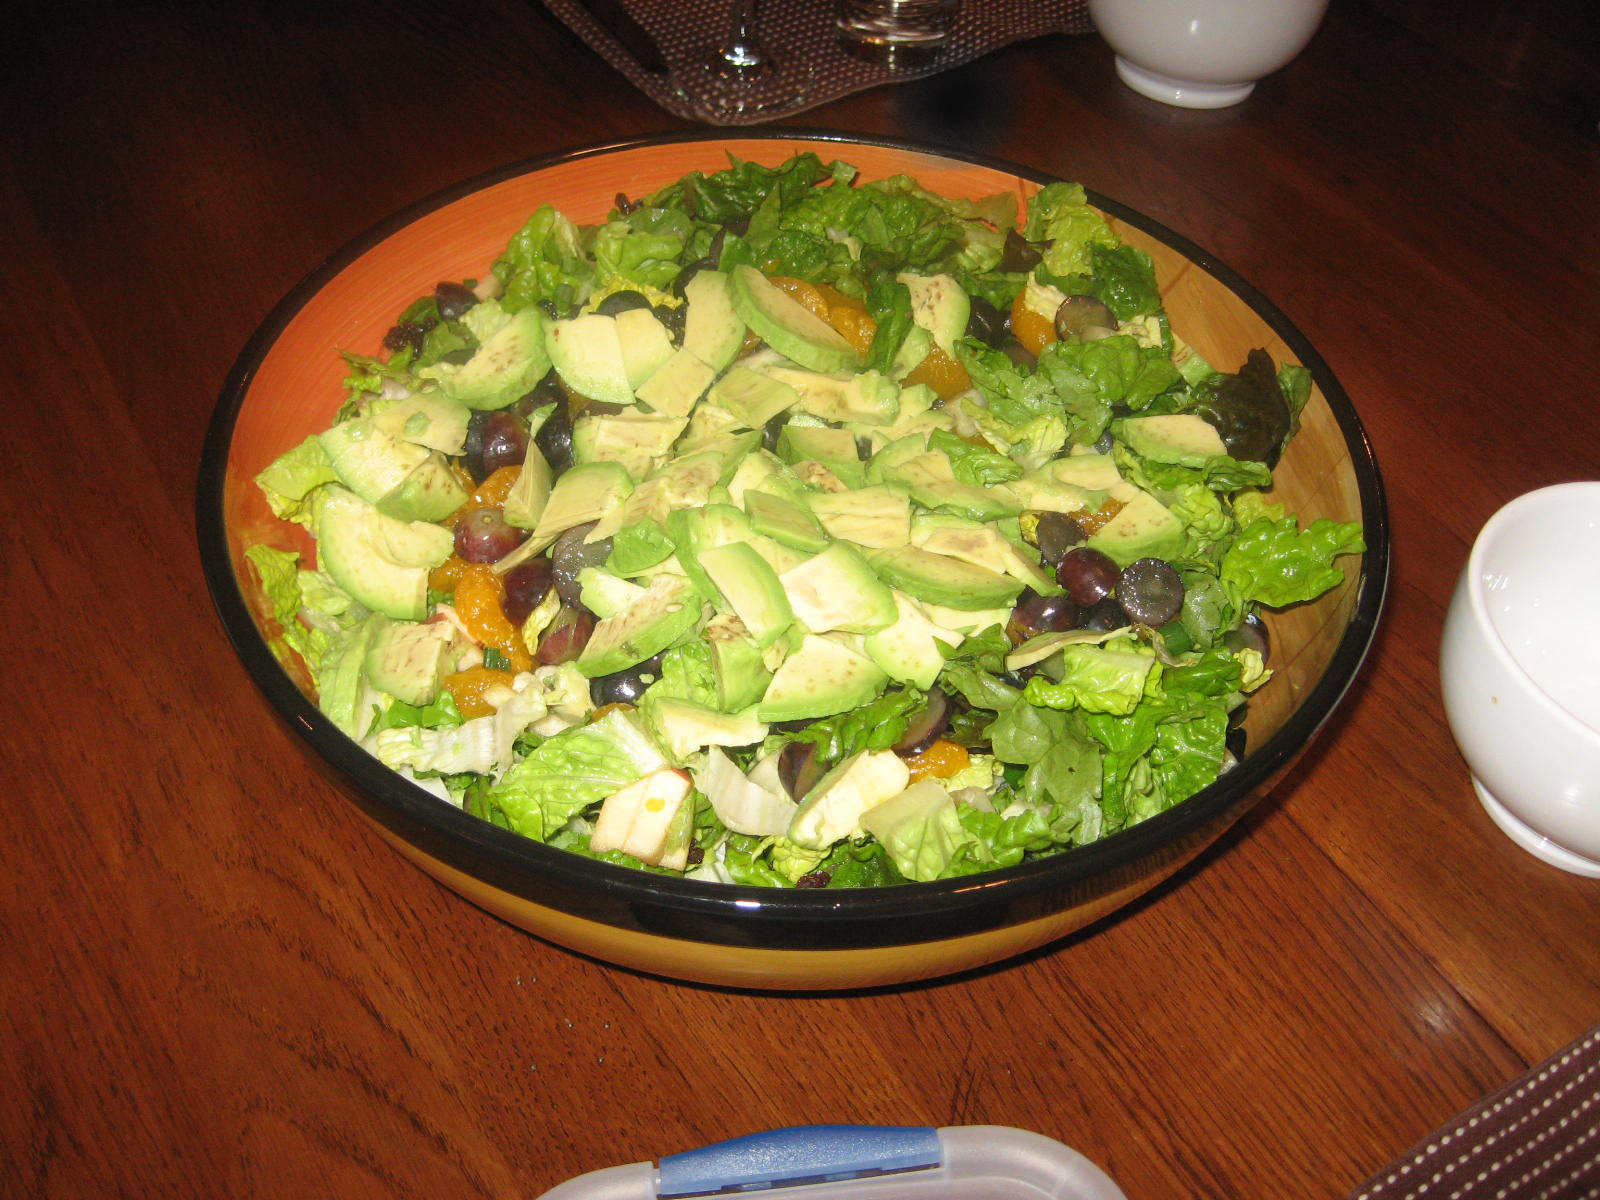 a large salad is in a brown bowl on a table